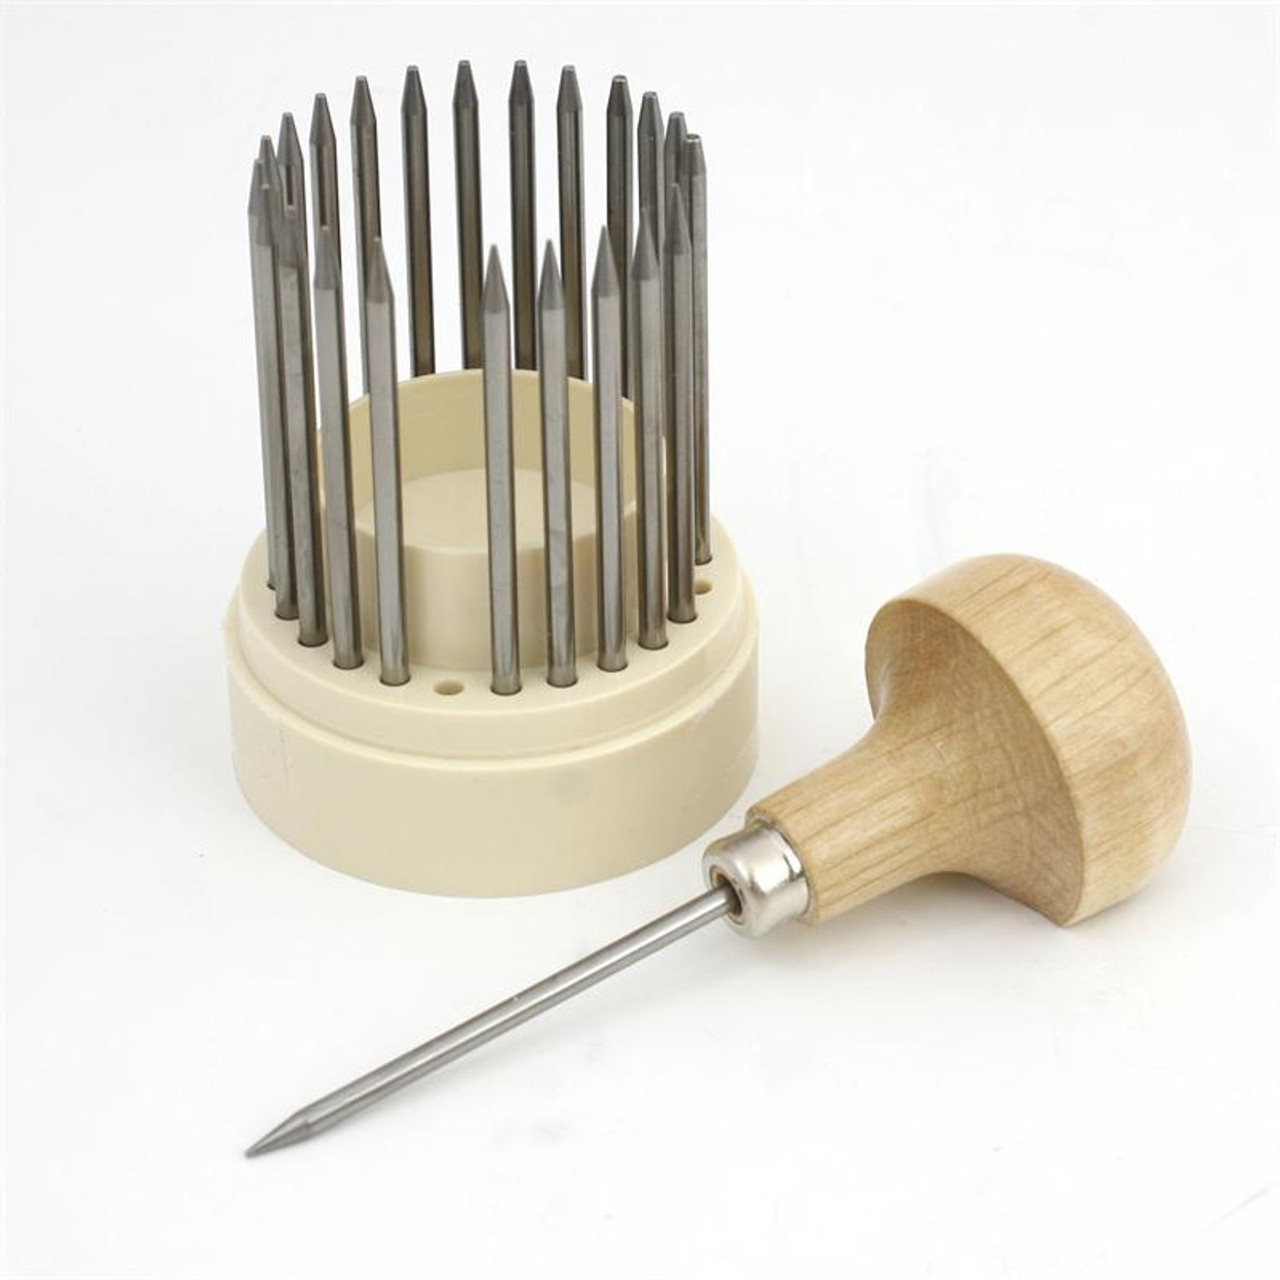 53.160 = Beading Tools Set with 23 Tips and Handle by FDJtool